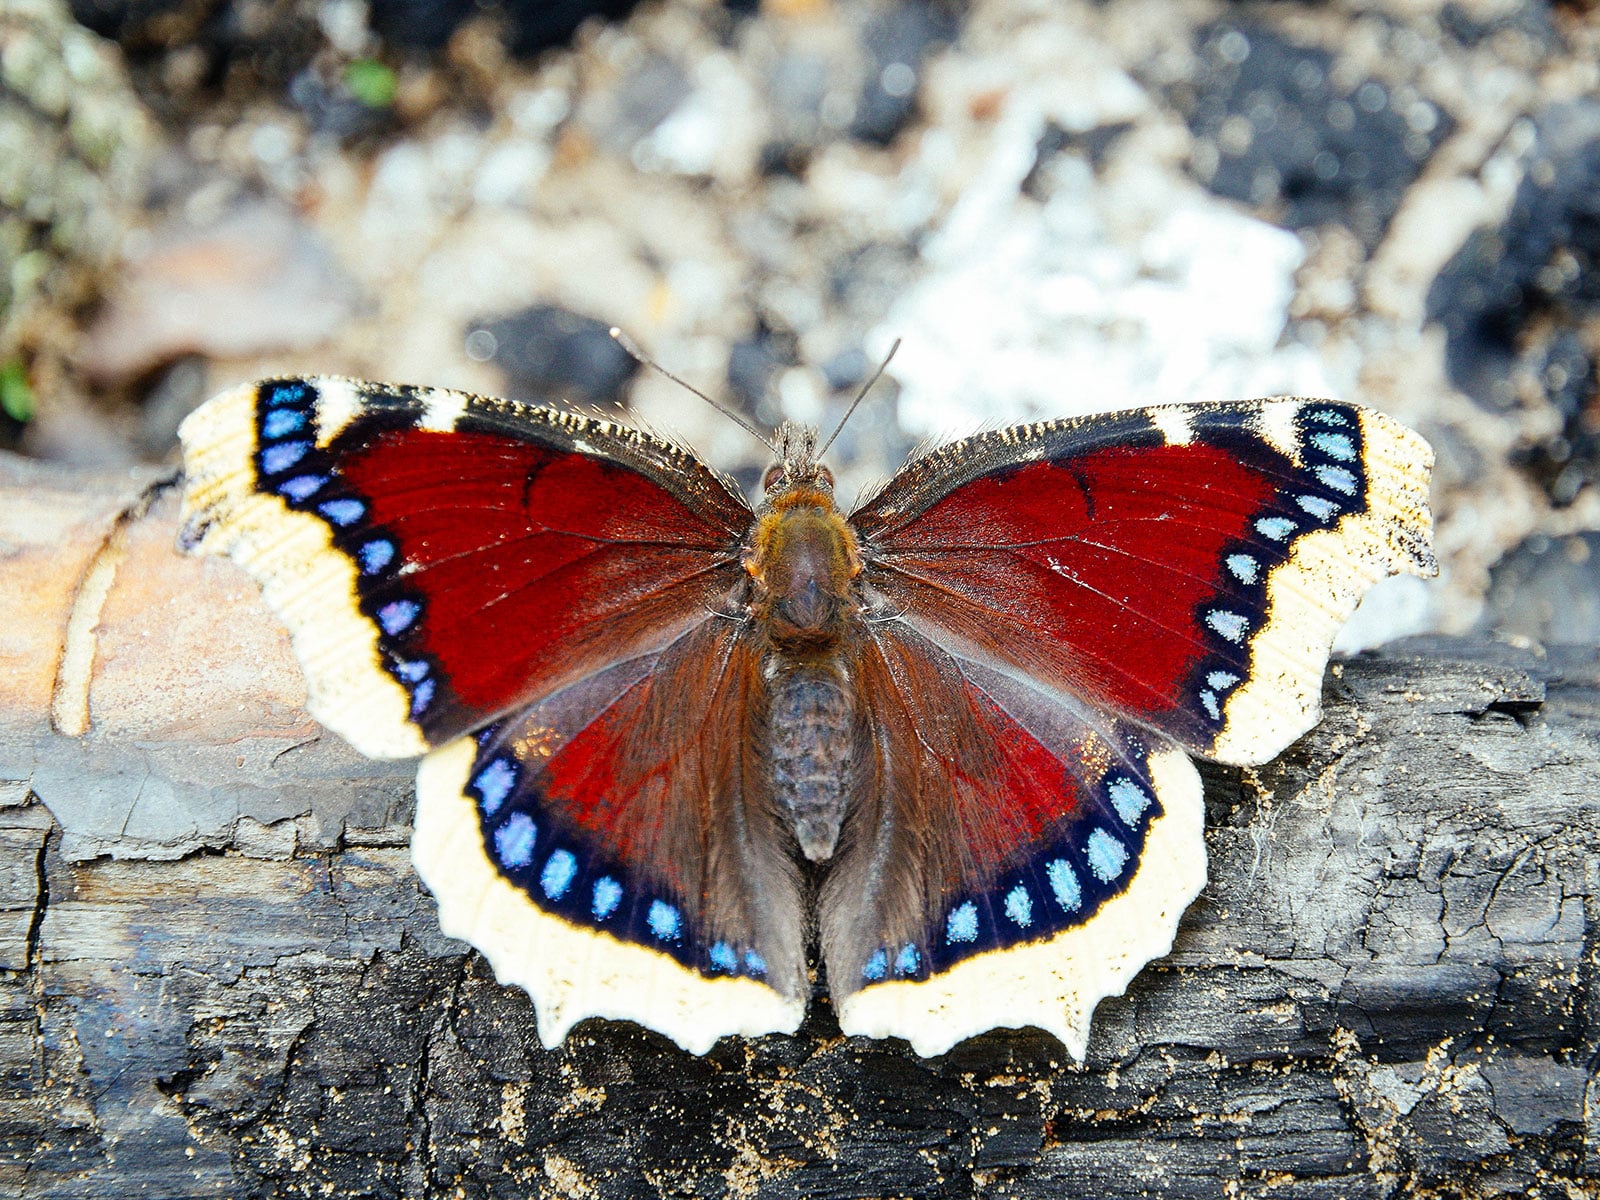 Mourning cloak butterfly perched on a downed log